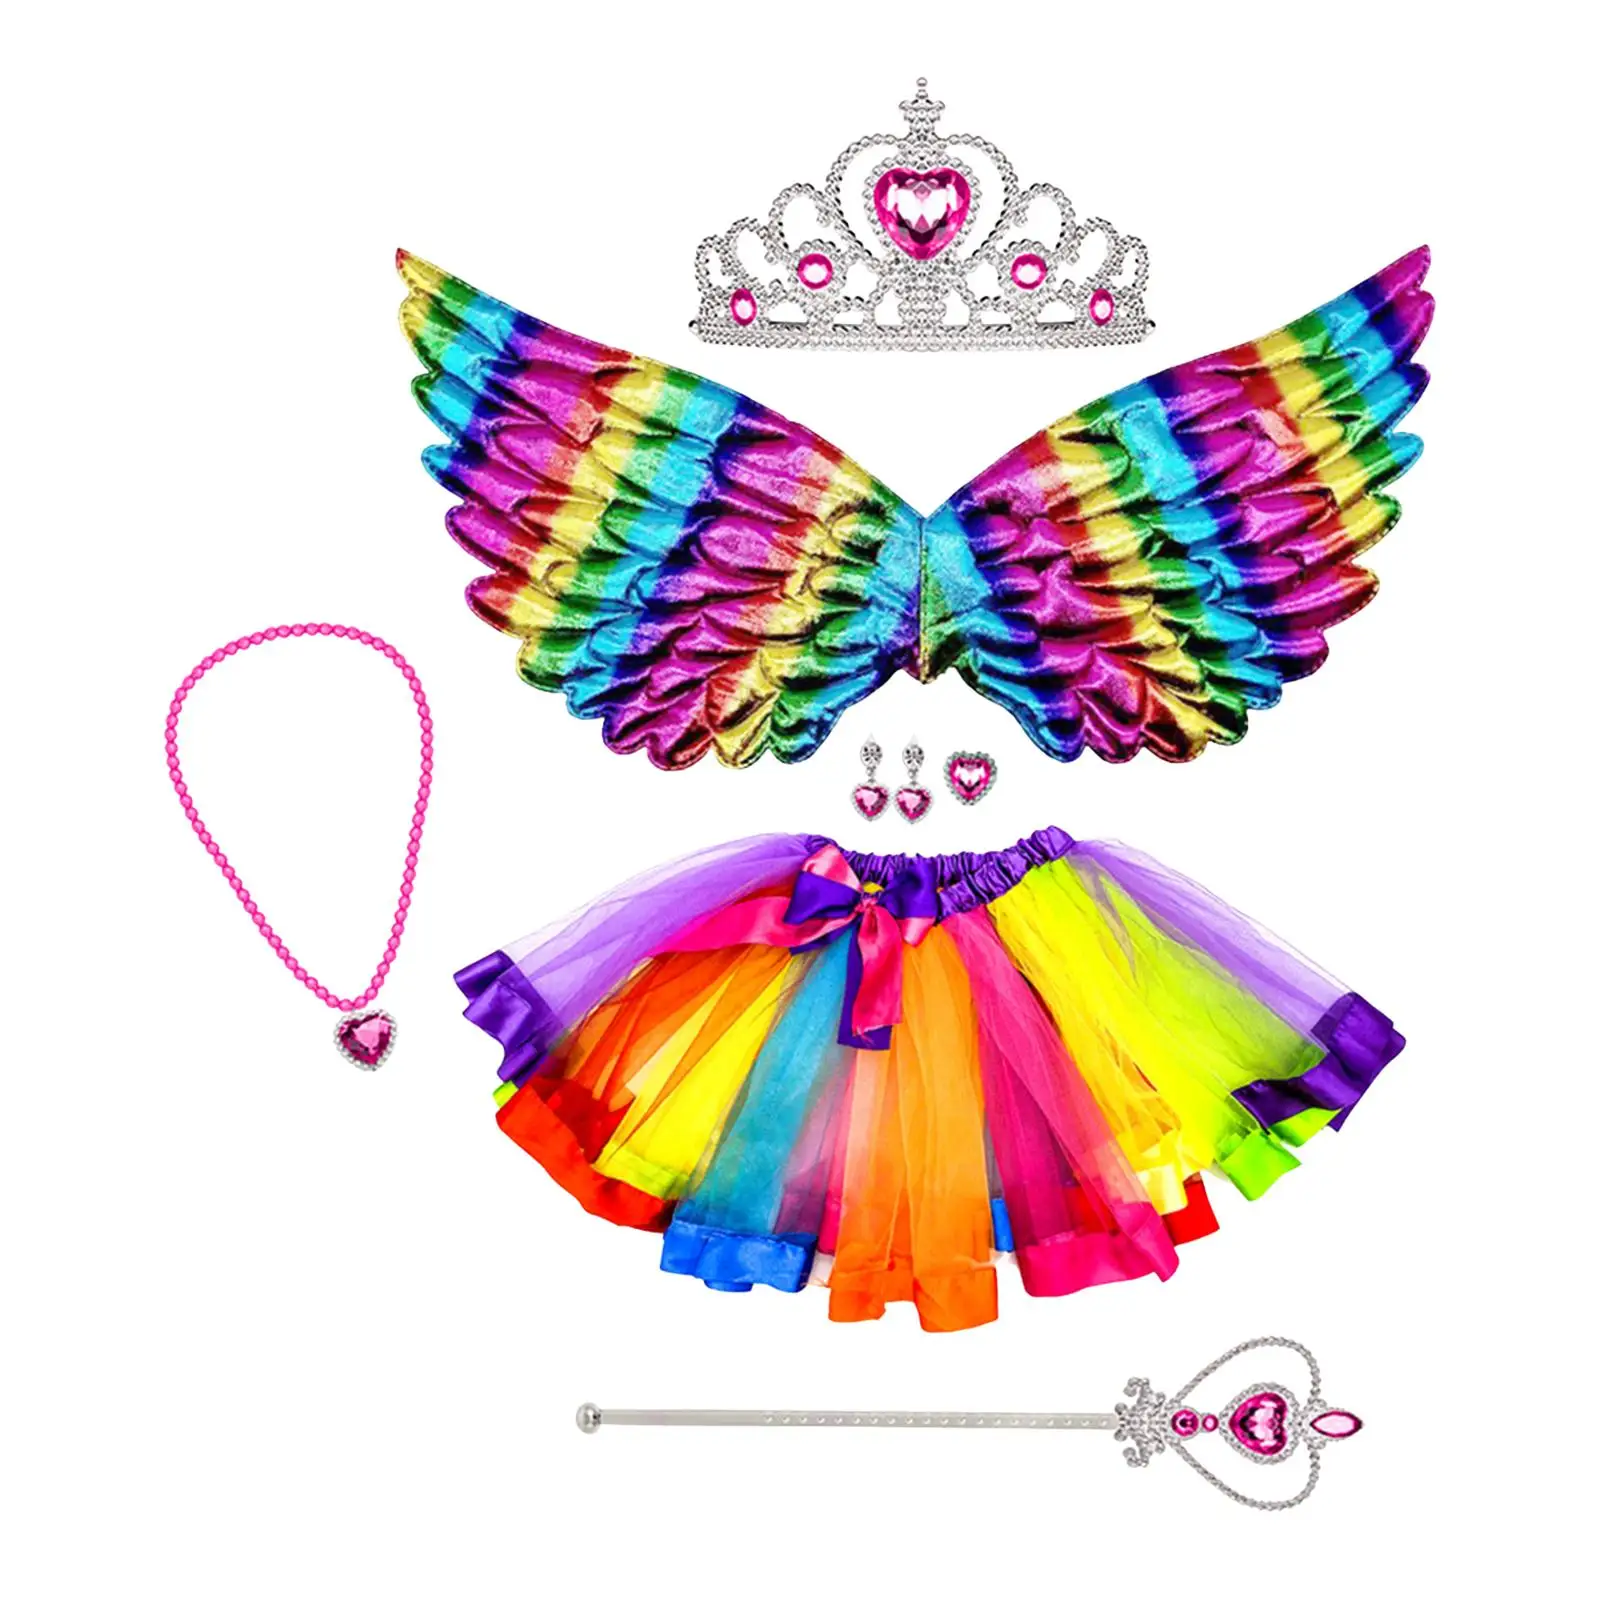 Girls Fairy Costume Cosplay Imaginative Play Party Favors Stage Performance with Wing for Halloween Festival Carnivals Nightclub